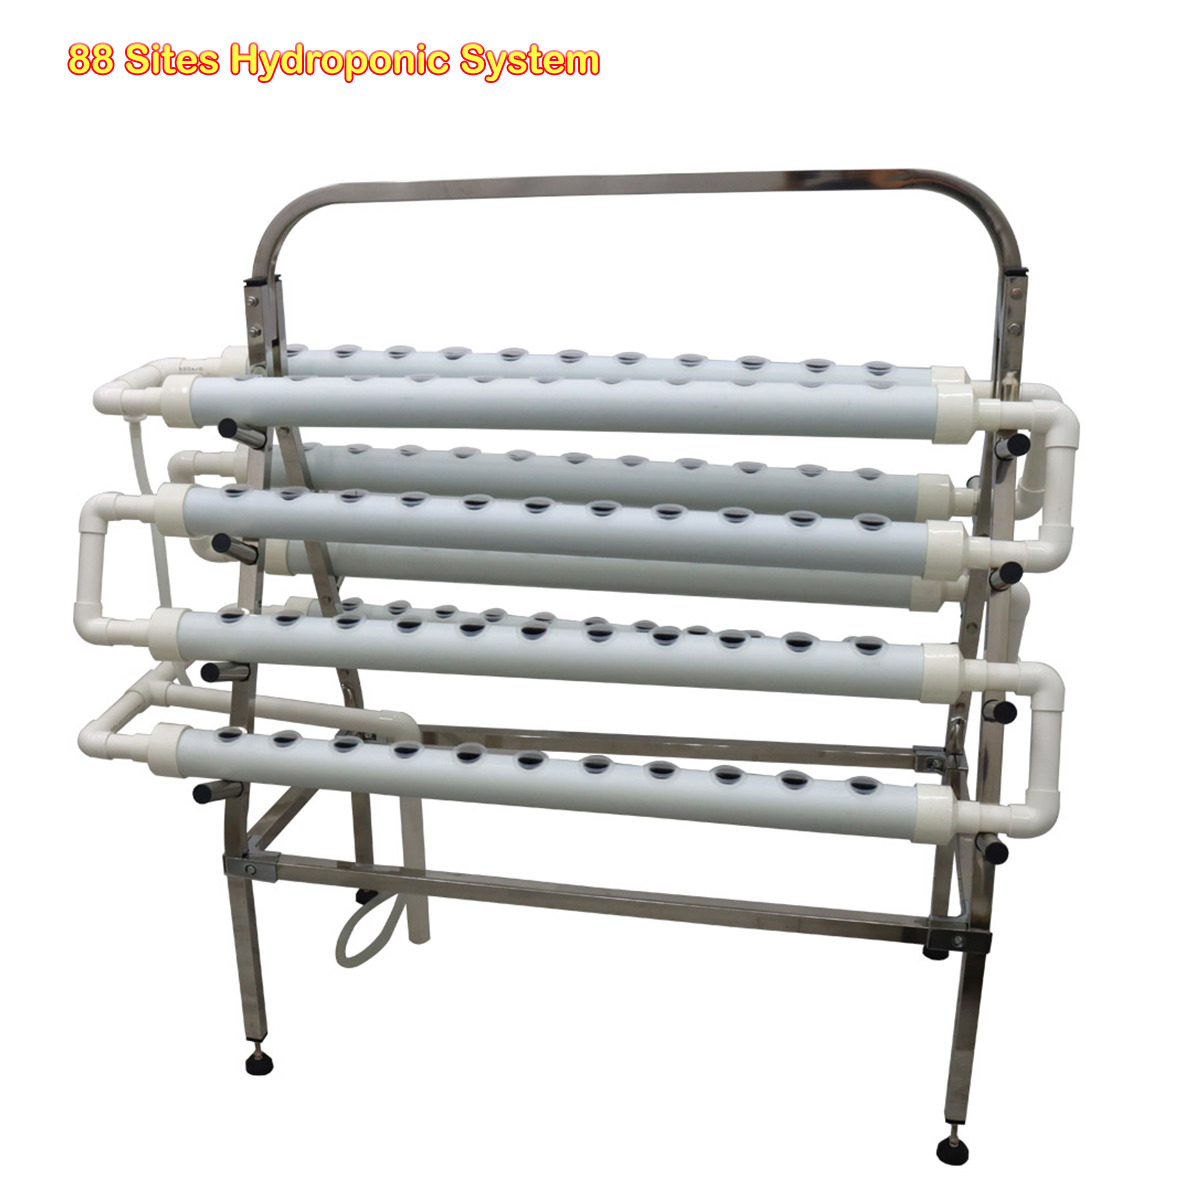 88-Sites Hydroponic Grow Kit w/ Stainless Steel Support for Planting Vegetables